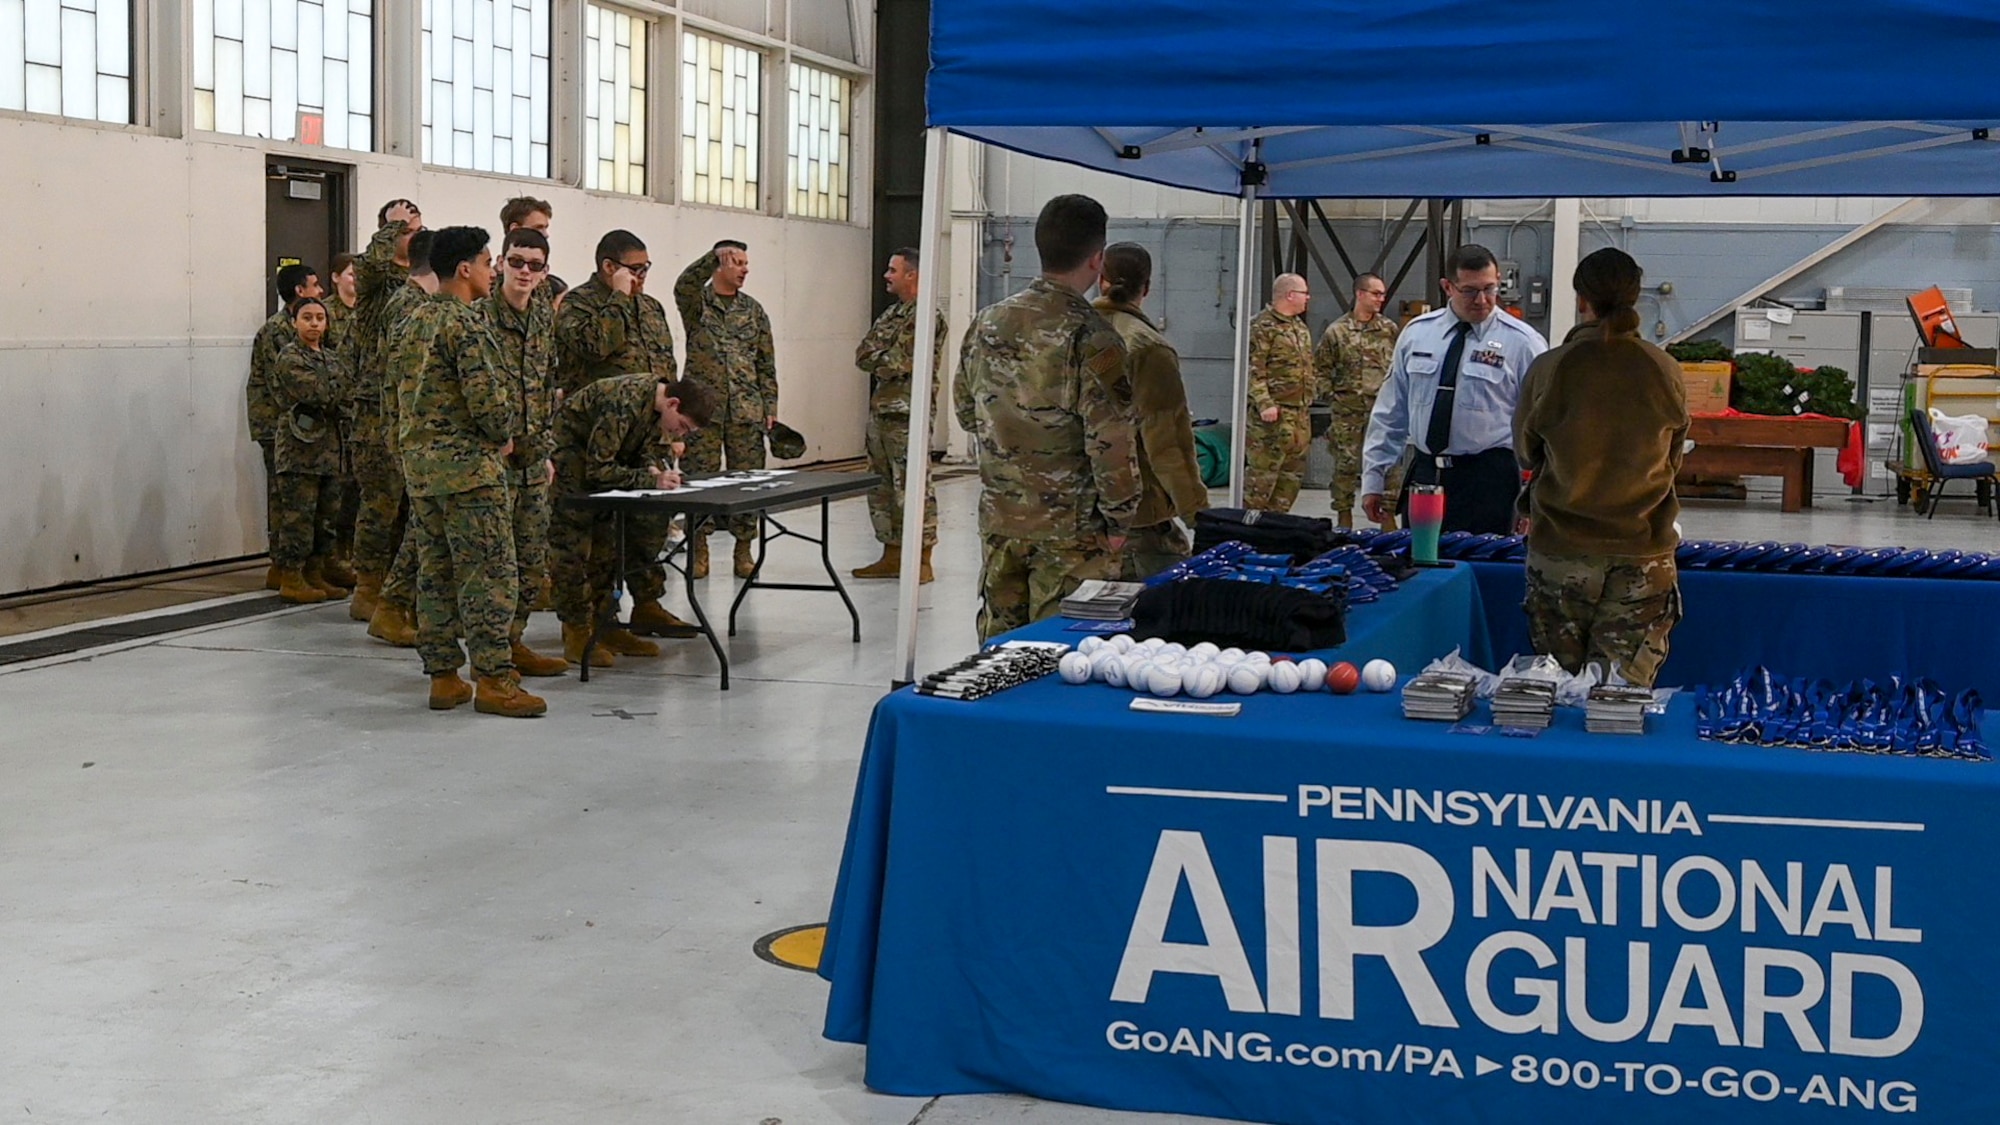 People in uniform stand in front of an Air National Guard tent inside of a hangar.